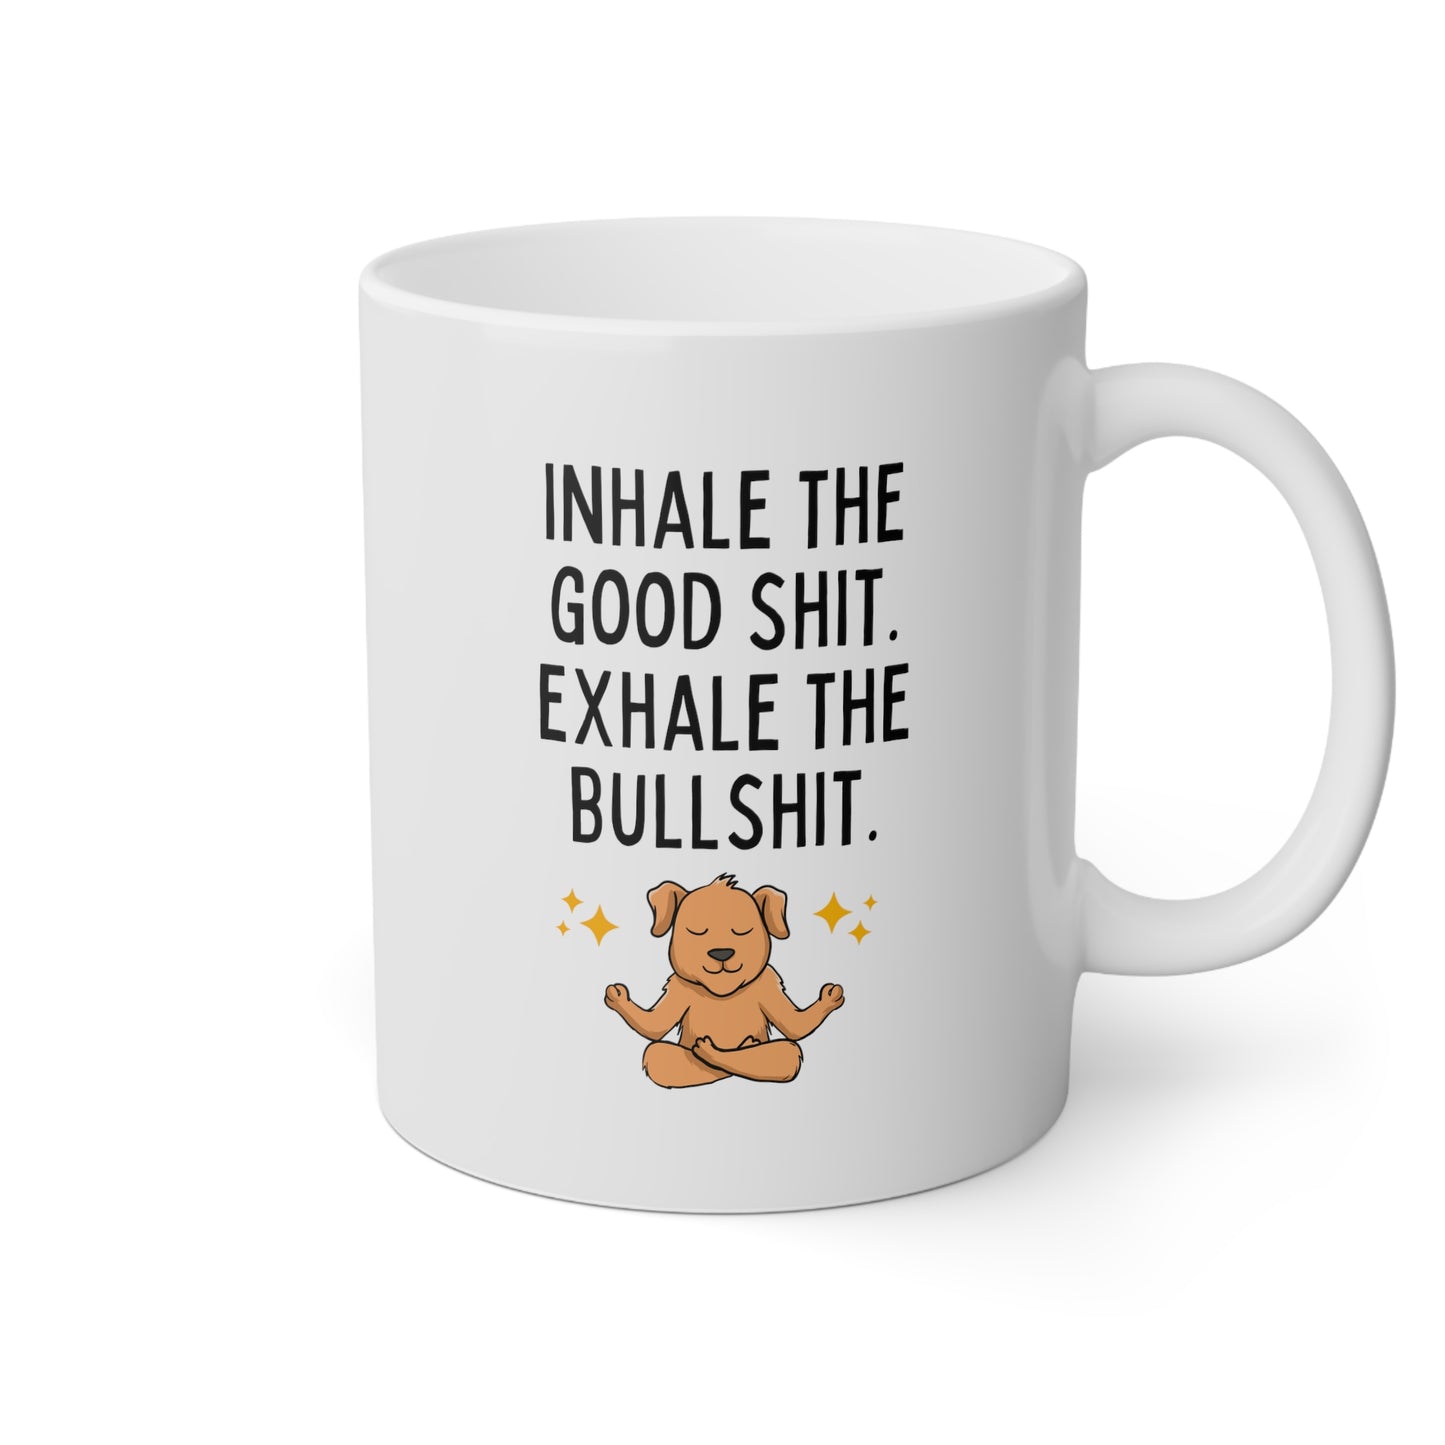 Inhale the Good Shit Exhale the Bullshit 11oz white funny large coffee mug gift for dog yoga lover fur mom BS cuss sarcastic curse cup waveywares wavey wares wavywares wavy wares